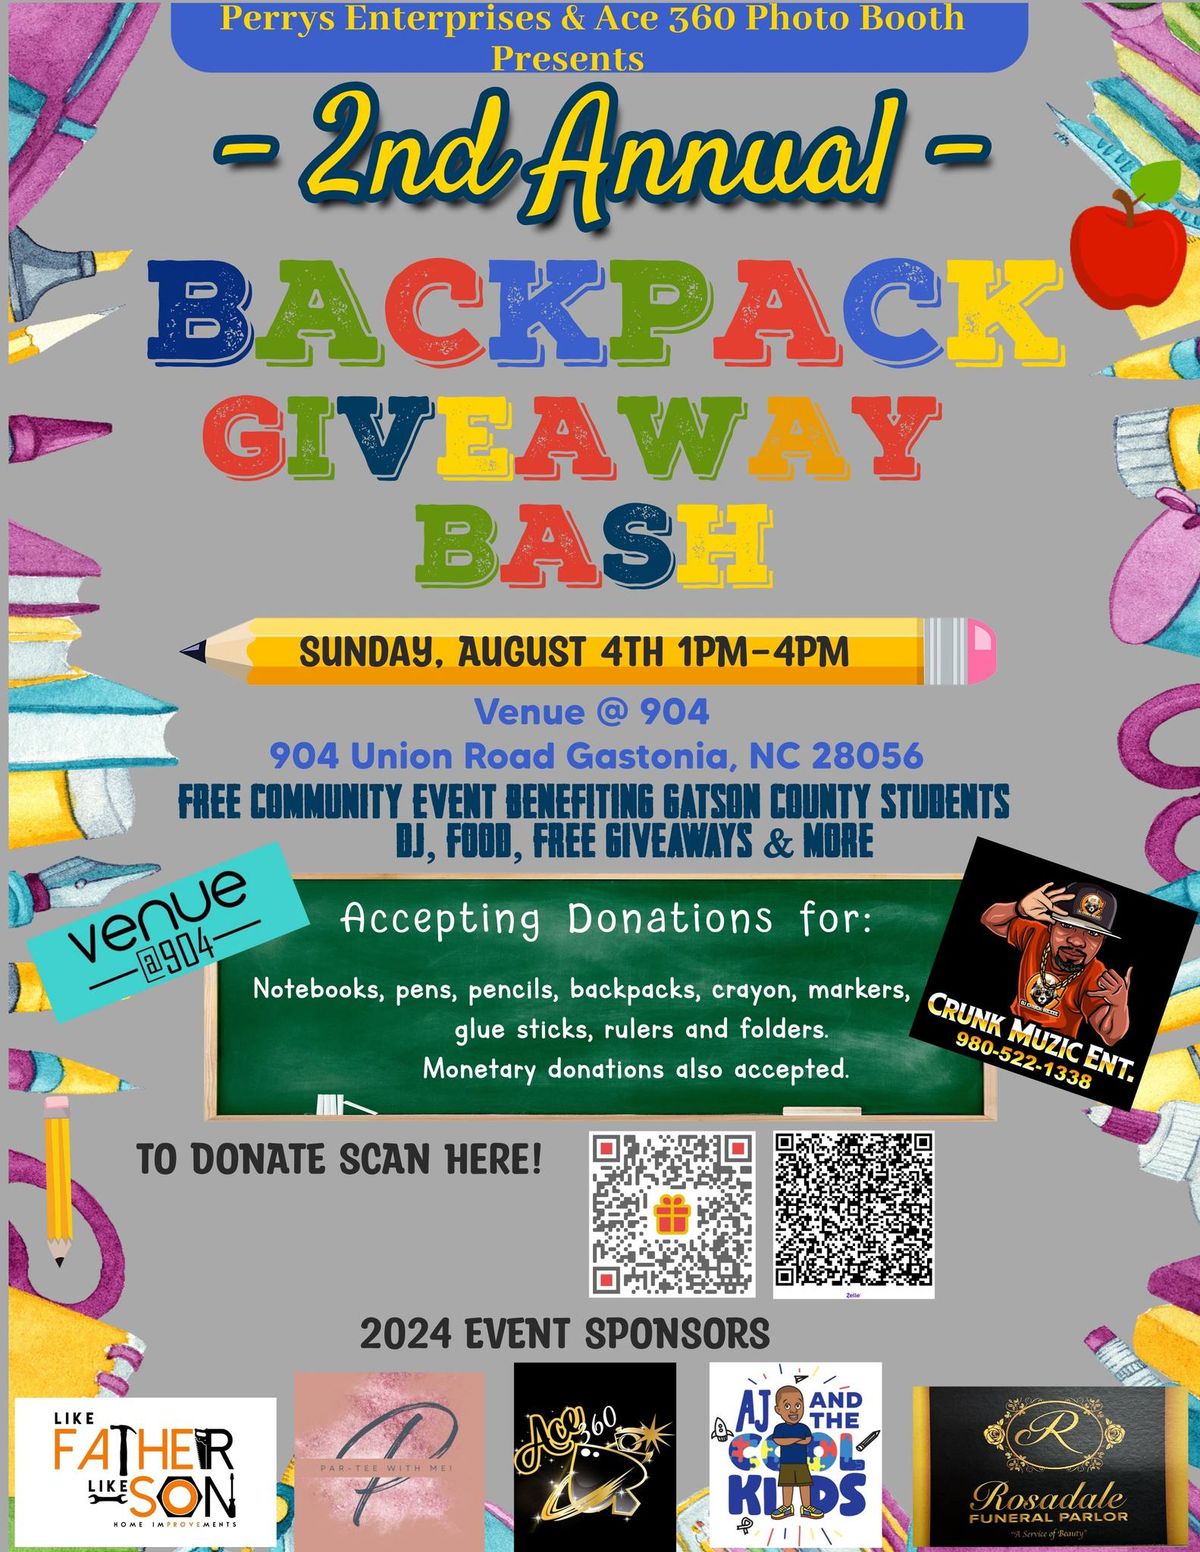 2nd Annual Backpack Giveaway Bash 